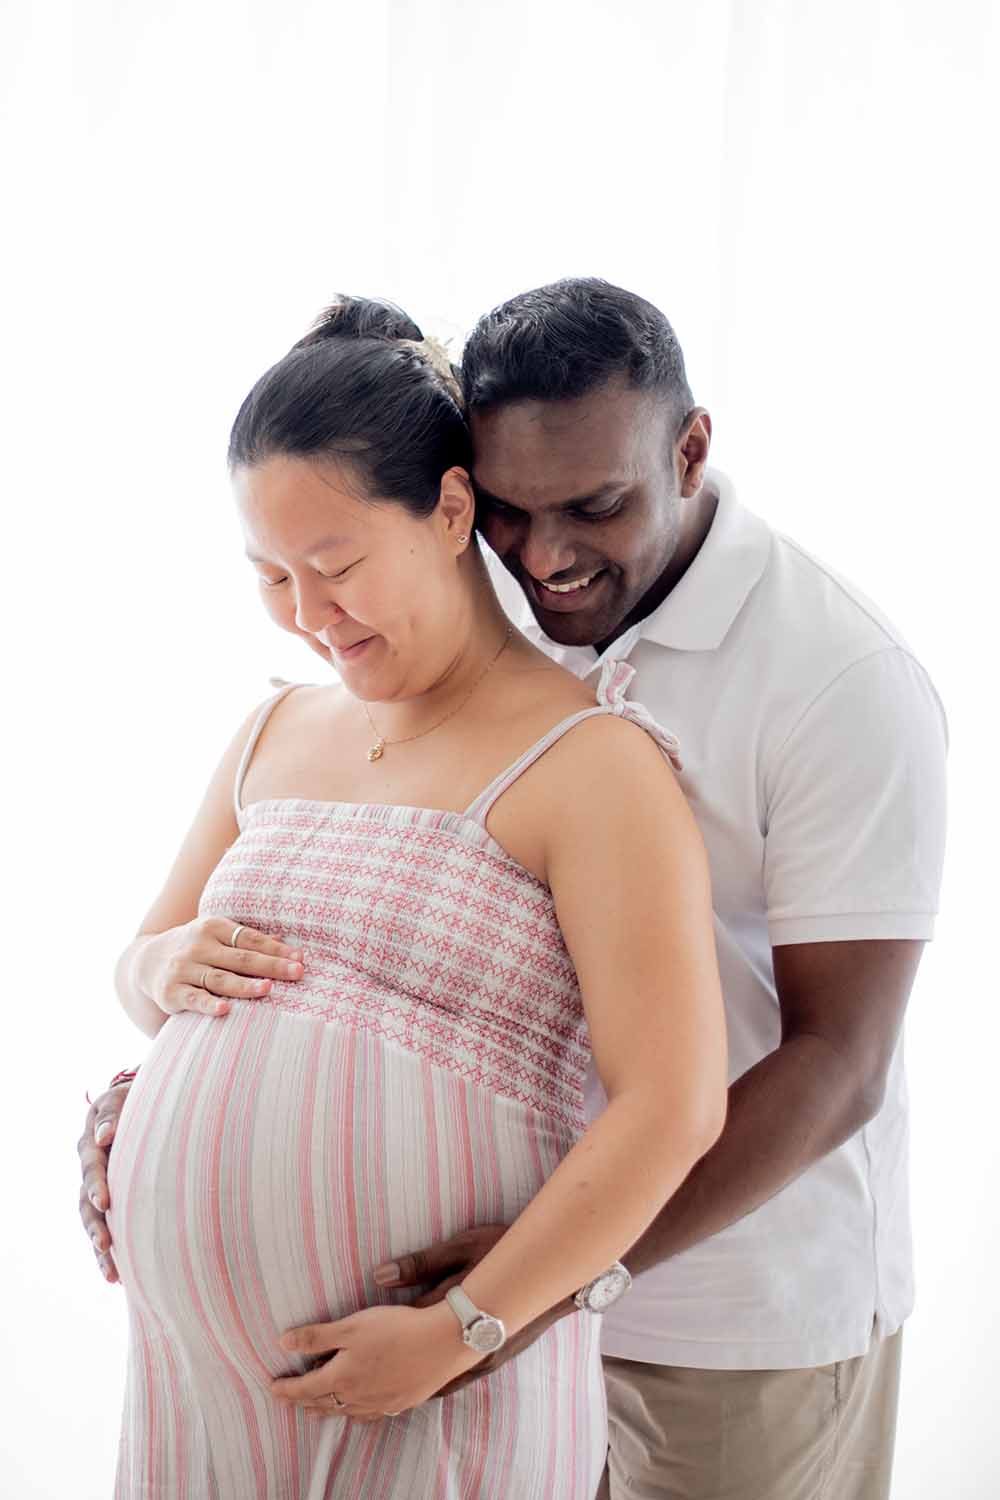 A pregnant woman, and her supportive husband standing behind her, and holding her.